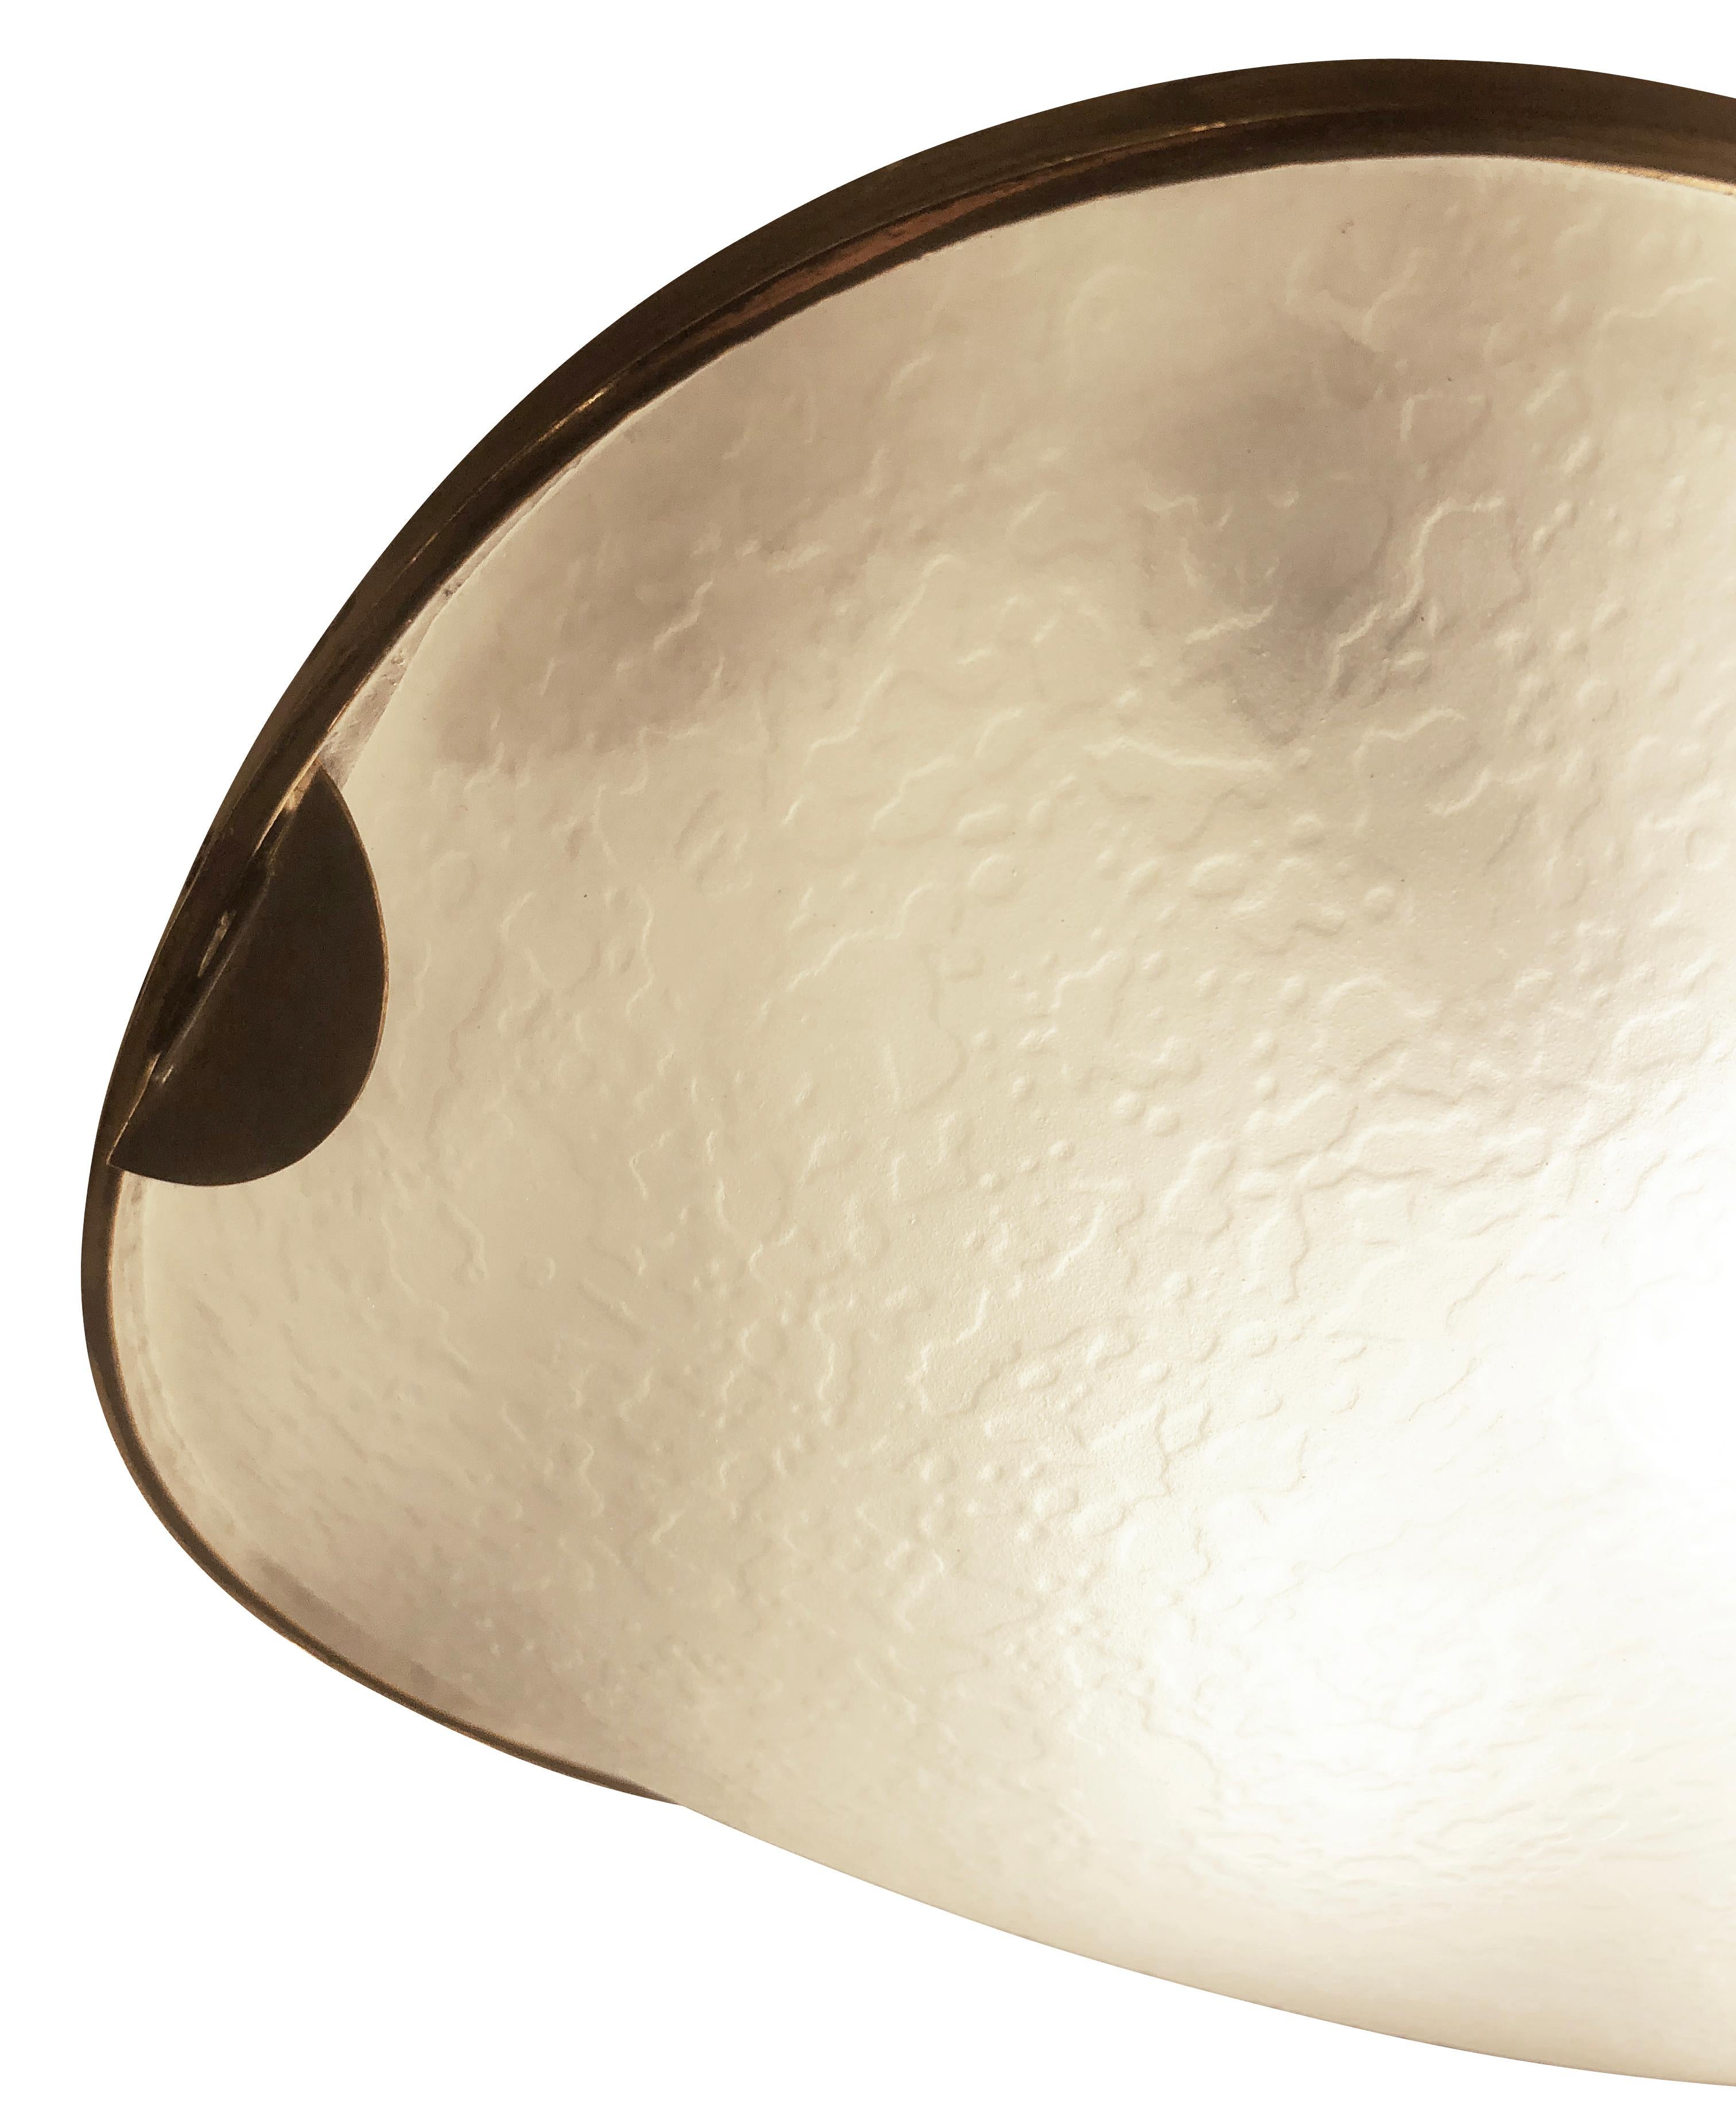 1960s racetrack flush mount or sconce by Fontana Arte featuring a frosted and textured glass which is framed with a thin brass rim. The texture of the glass, hard to fully grasp in pictures, hides the internal structure with its four candelabra